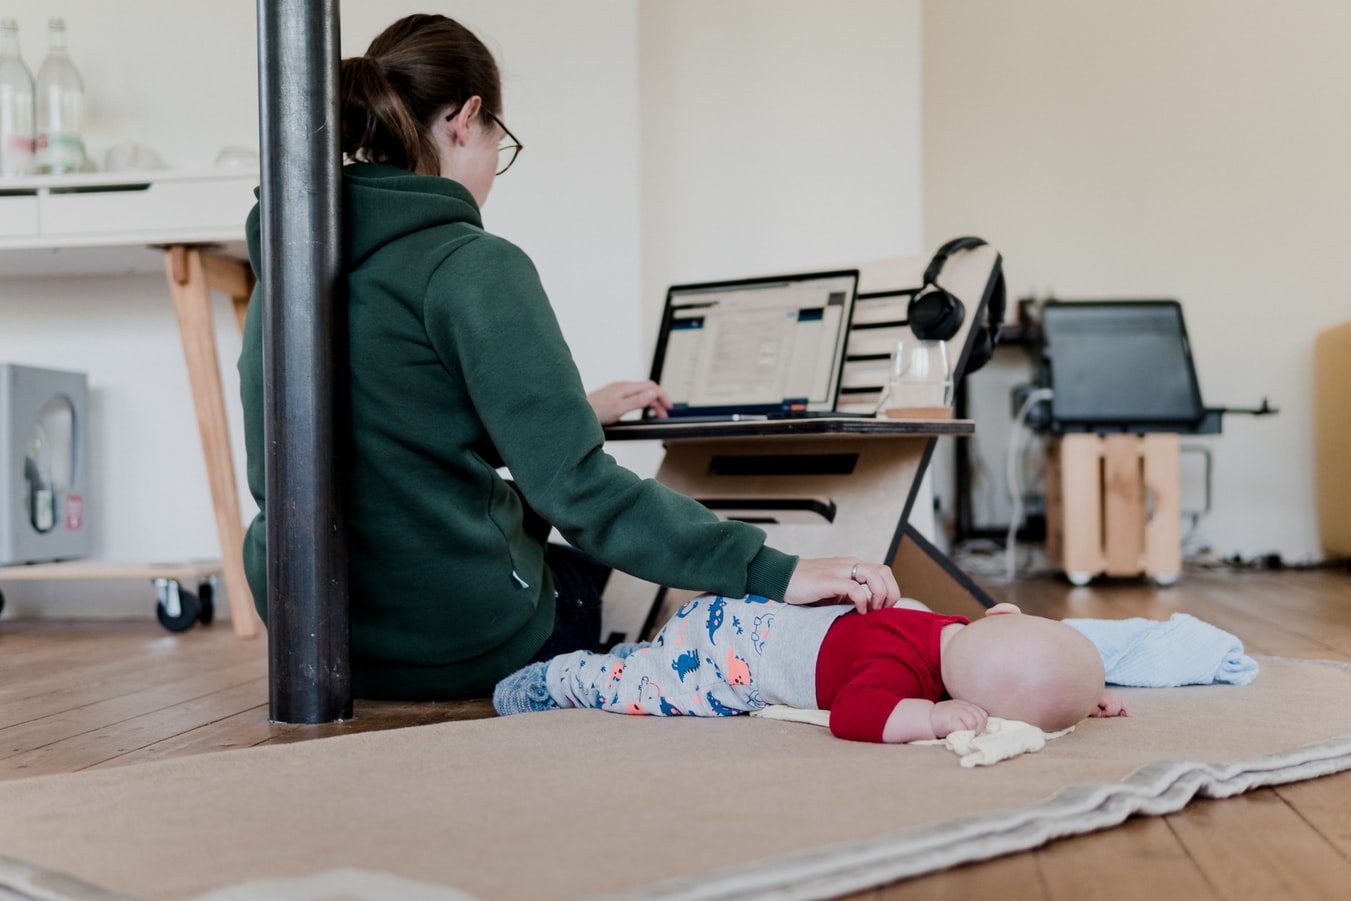 Mother working from home. Photo Credit: Standsome at Unsplash